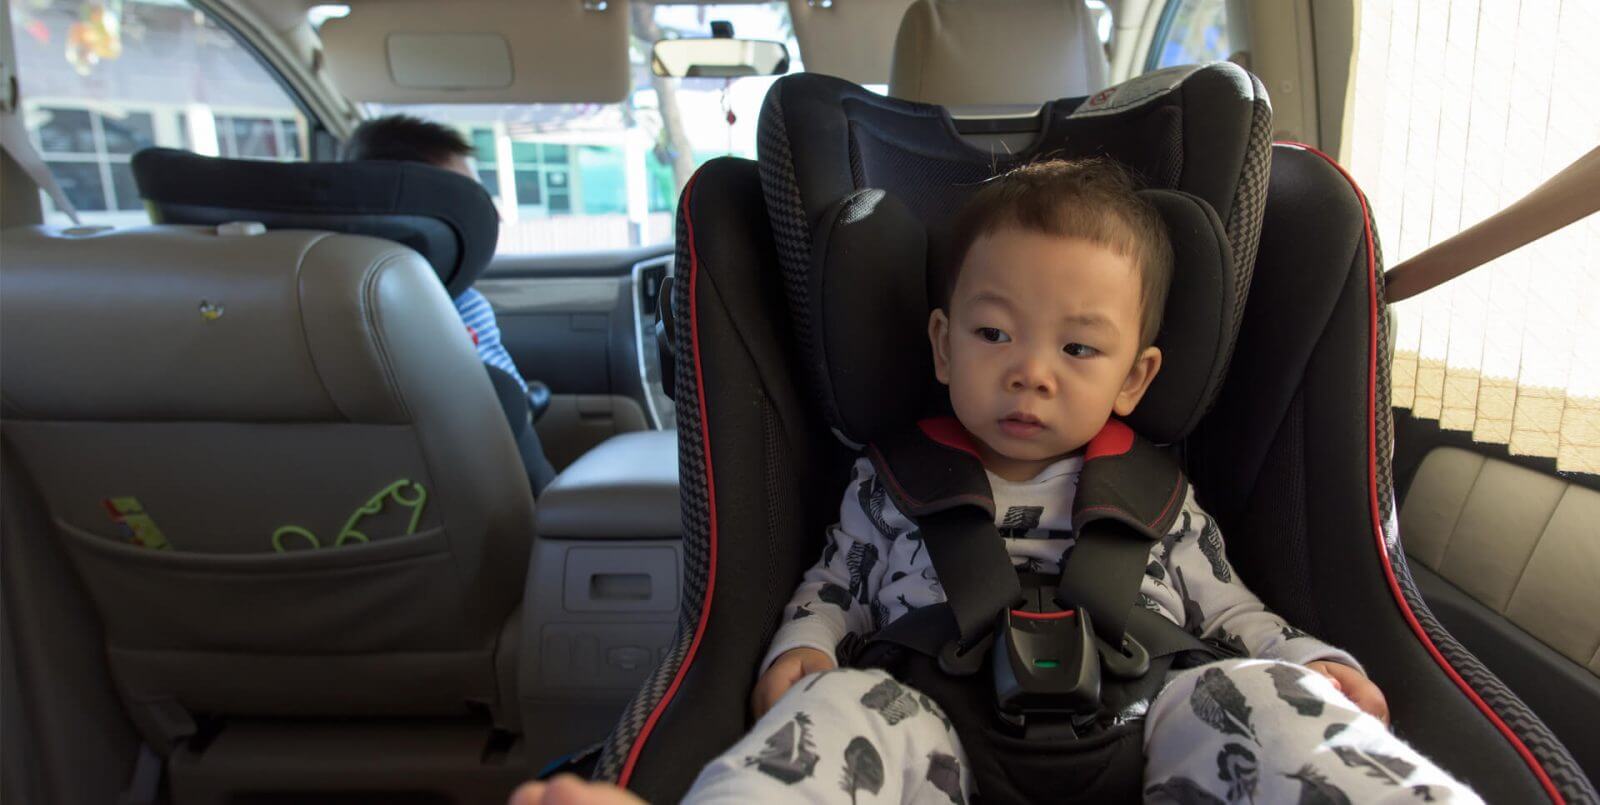 Image How  To Use Child Car Seat Properly